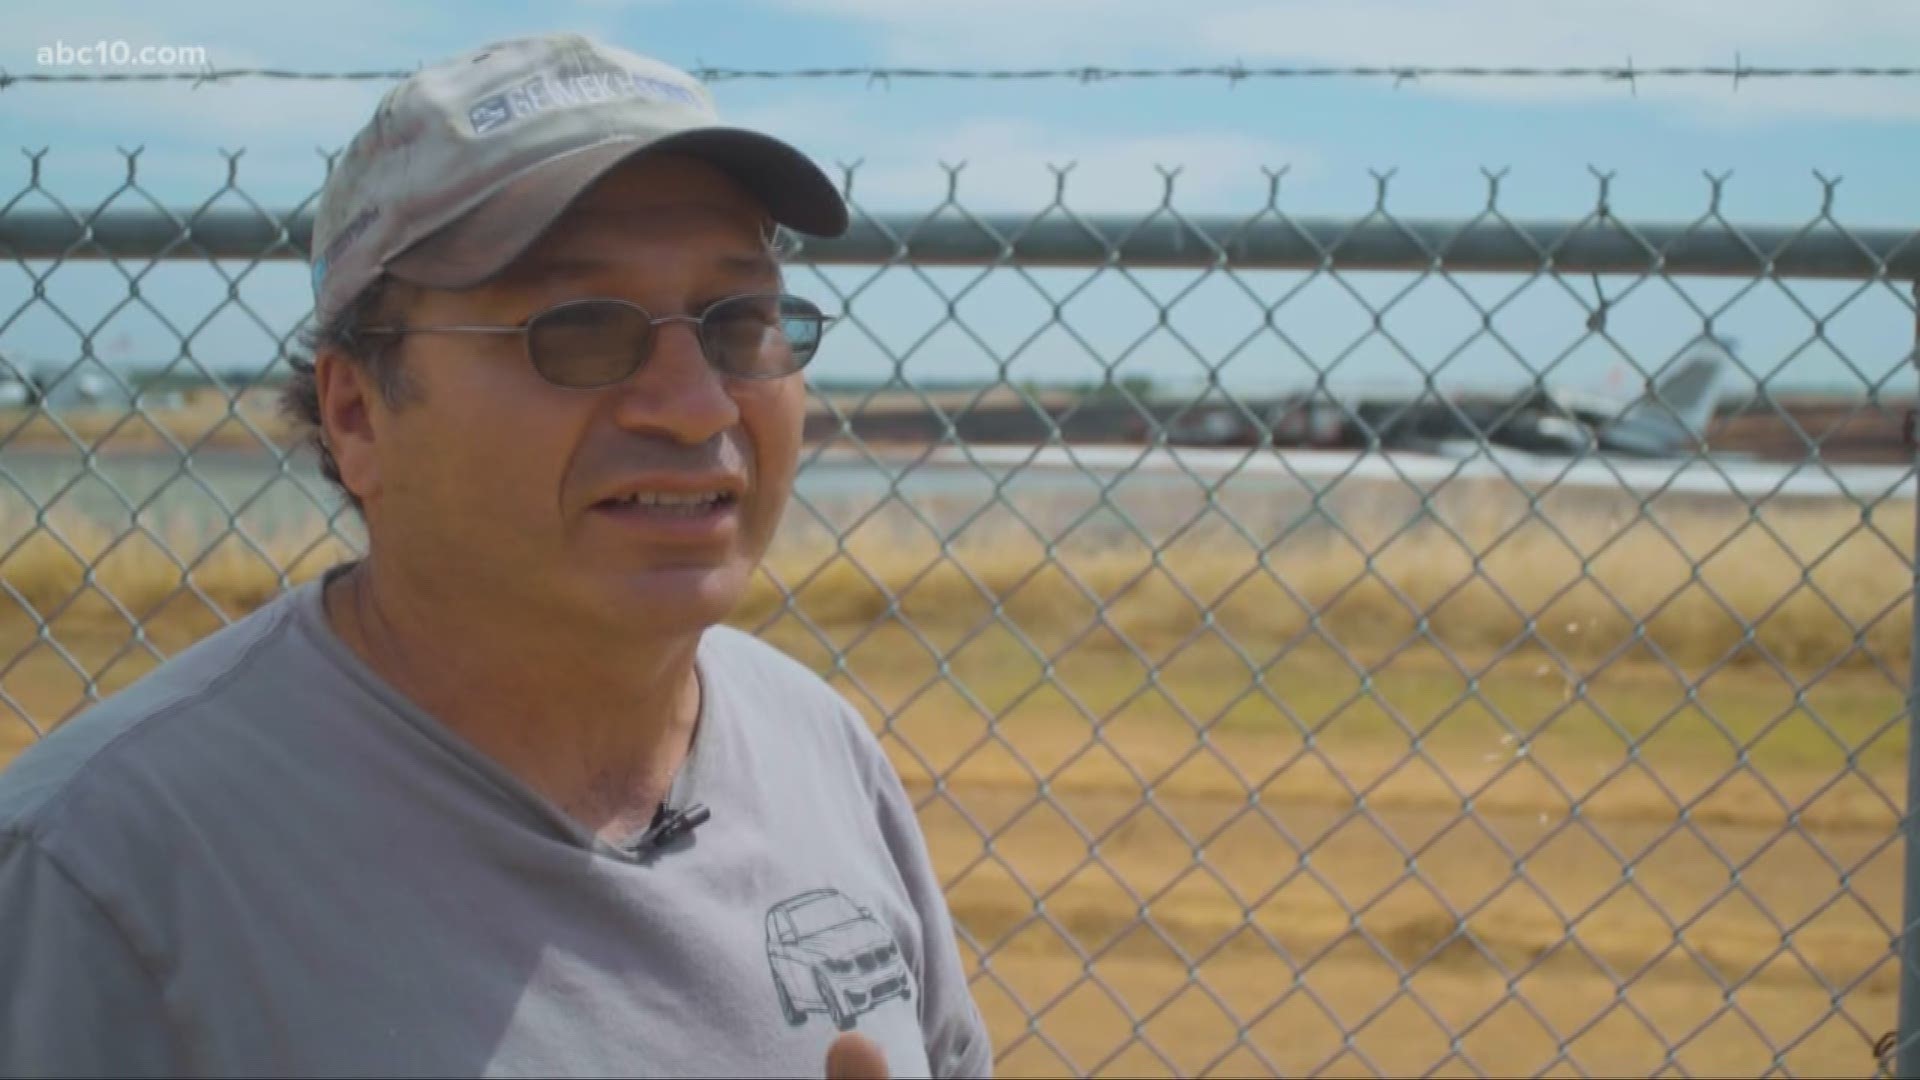 Pilot Gonzalo Peewee Curiel showed up shortly after the plane skidded to a stop at the end of the Oroville Municipal Airport runway. He said he spoke with the pilot soon after the crash.